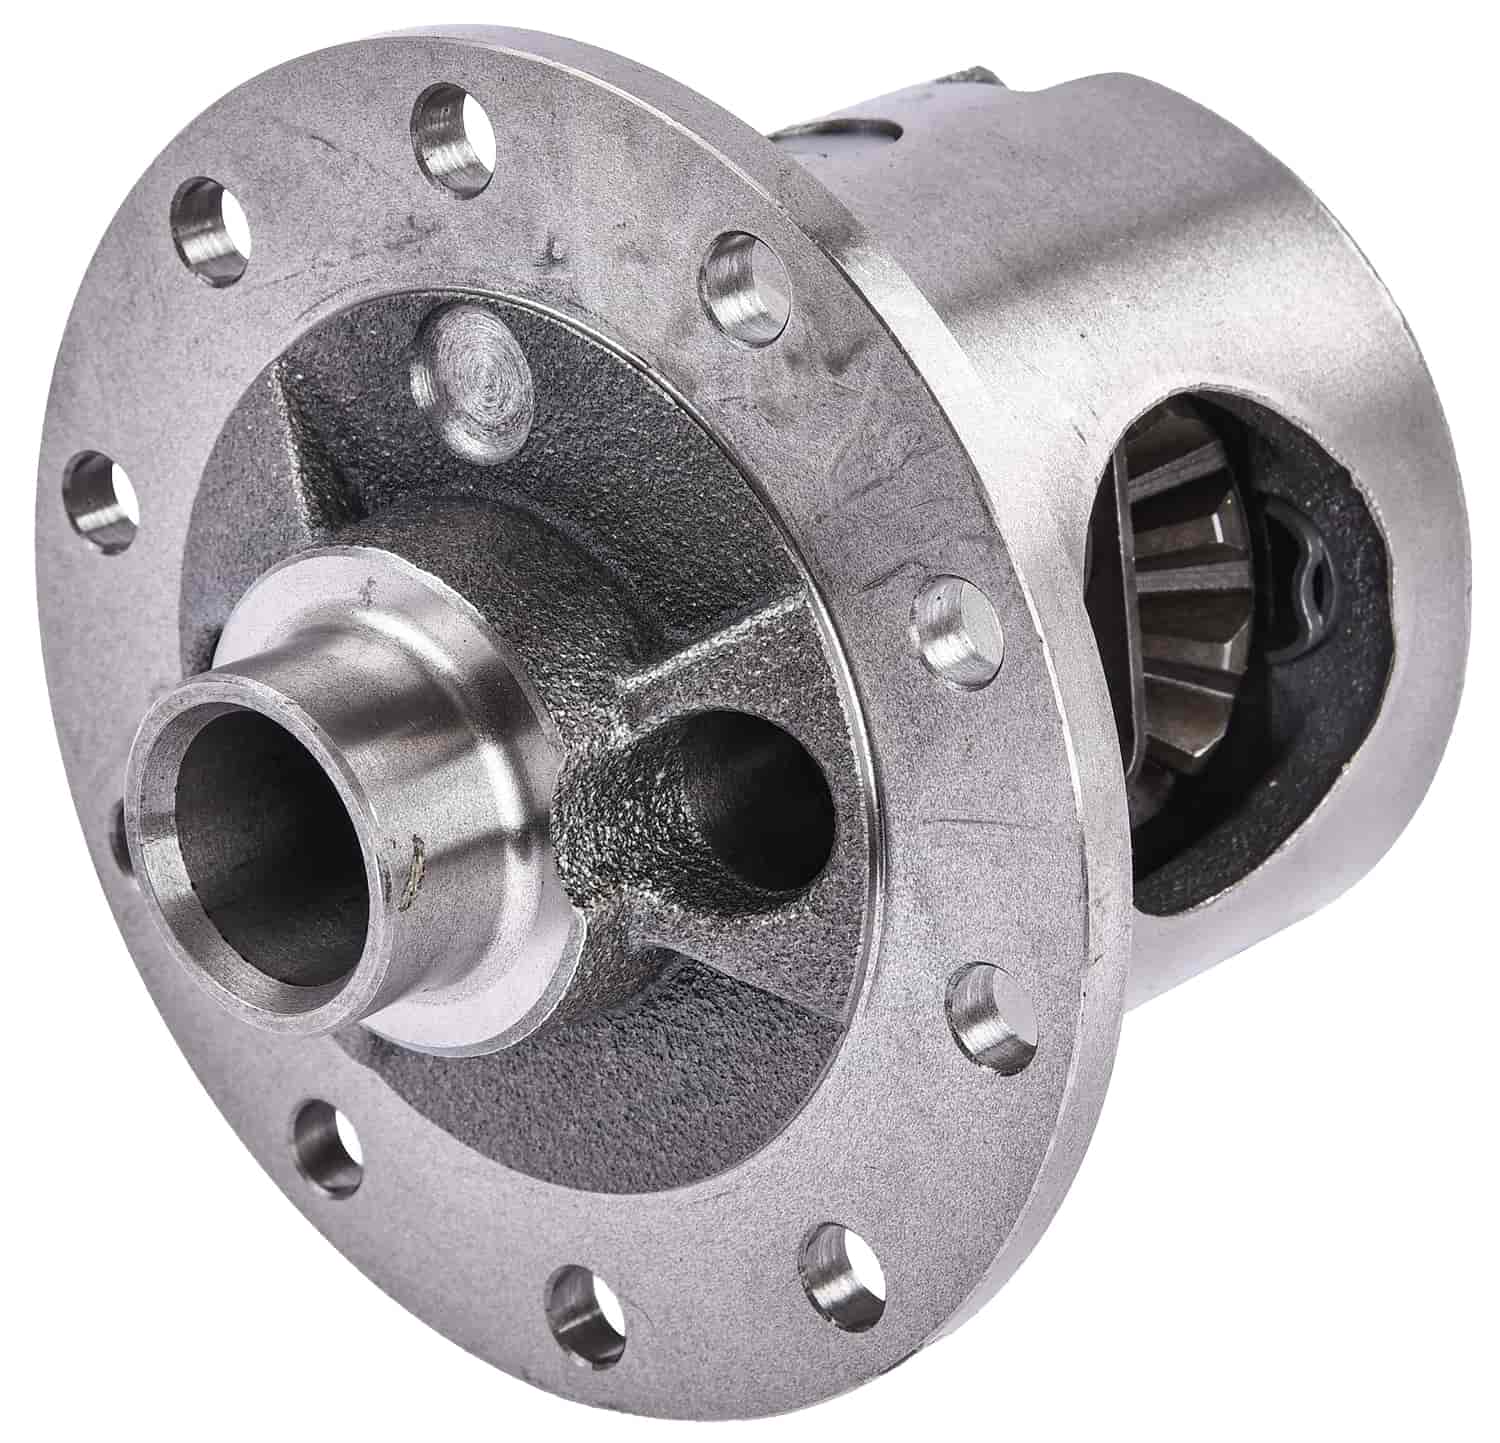 Posi Traction Differential for Ford Cars/Trucks Rear, Ford 7.5 in. 28-SPLINE [All Ratios]